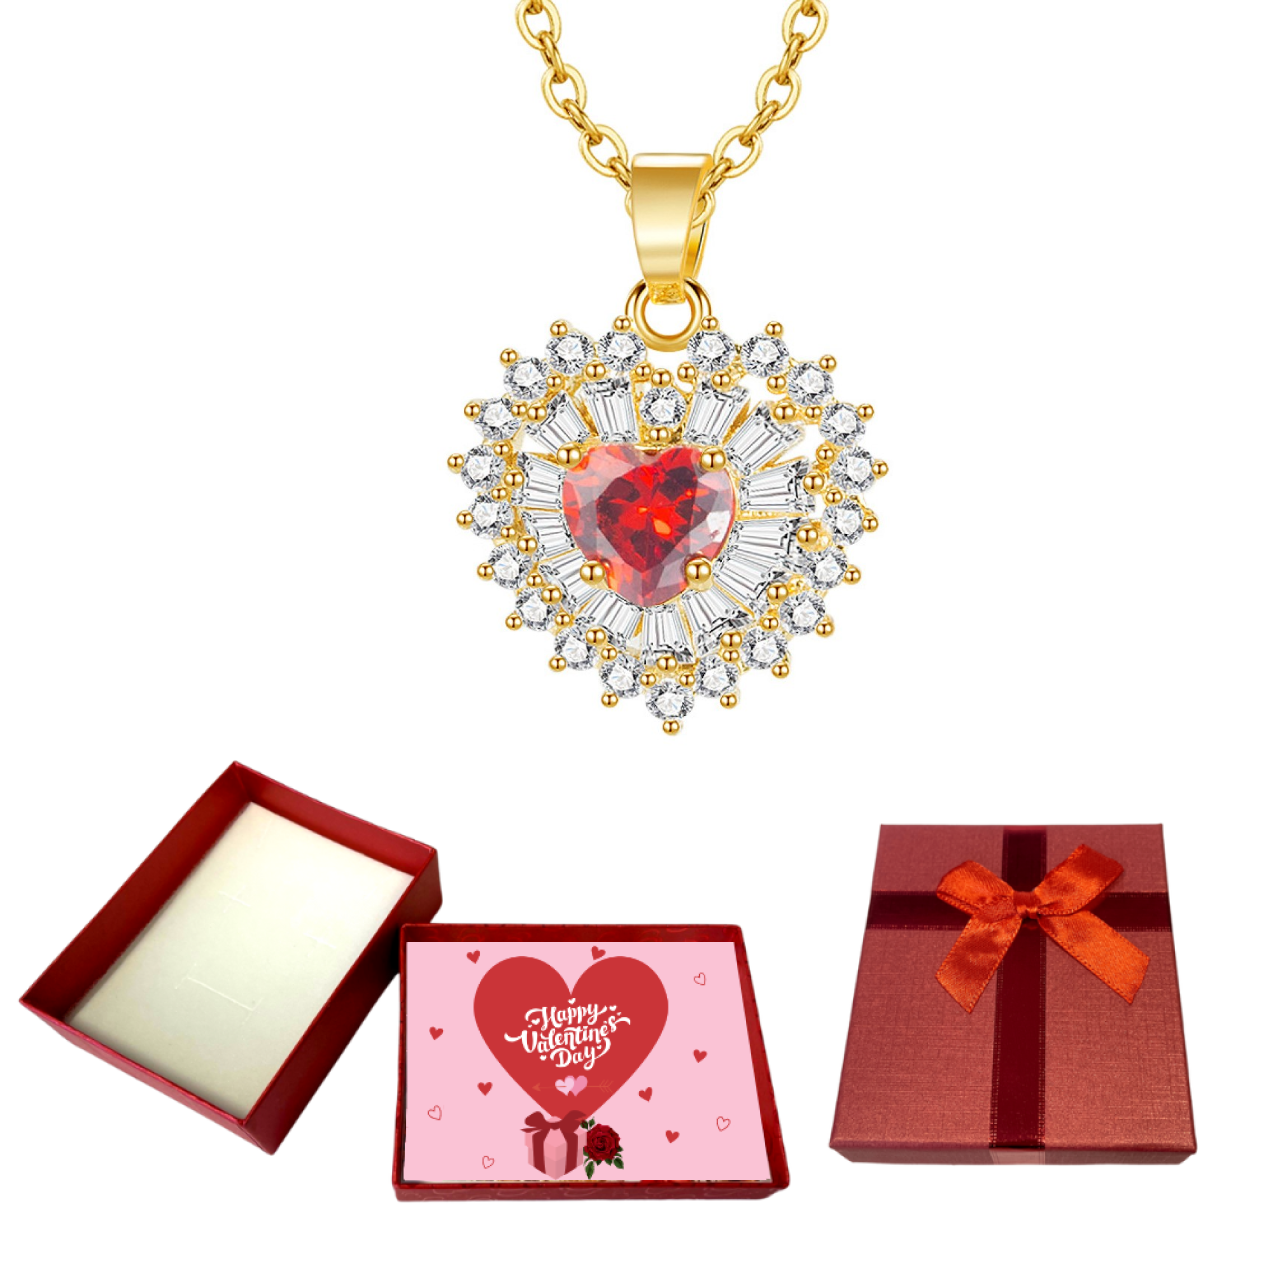 10 pcs - Red Ruby Zircon Crystals Love Heart-Shaped Gold Tone Pendant Necklace With Valentine Gift Box|GCJ293-Valentine Box|UK SELLER